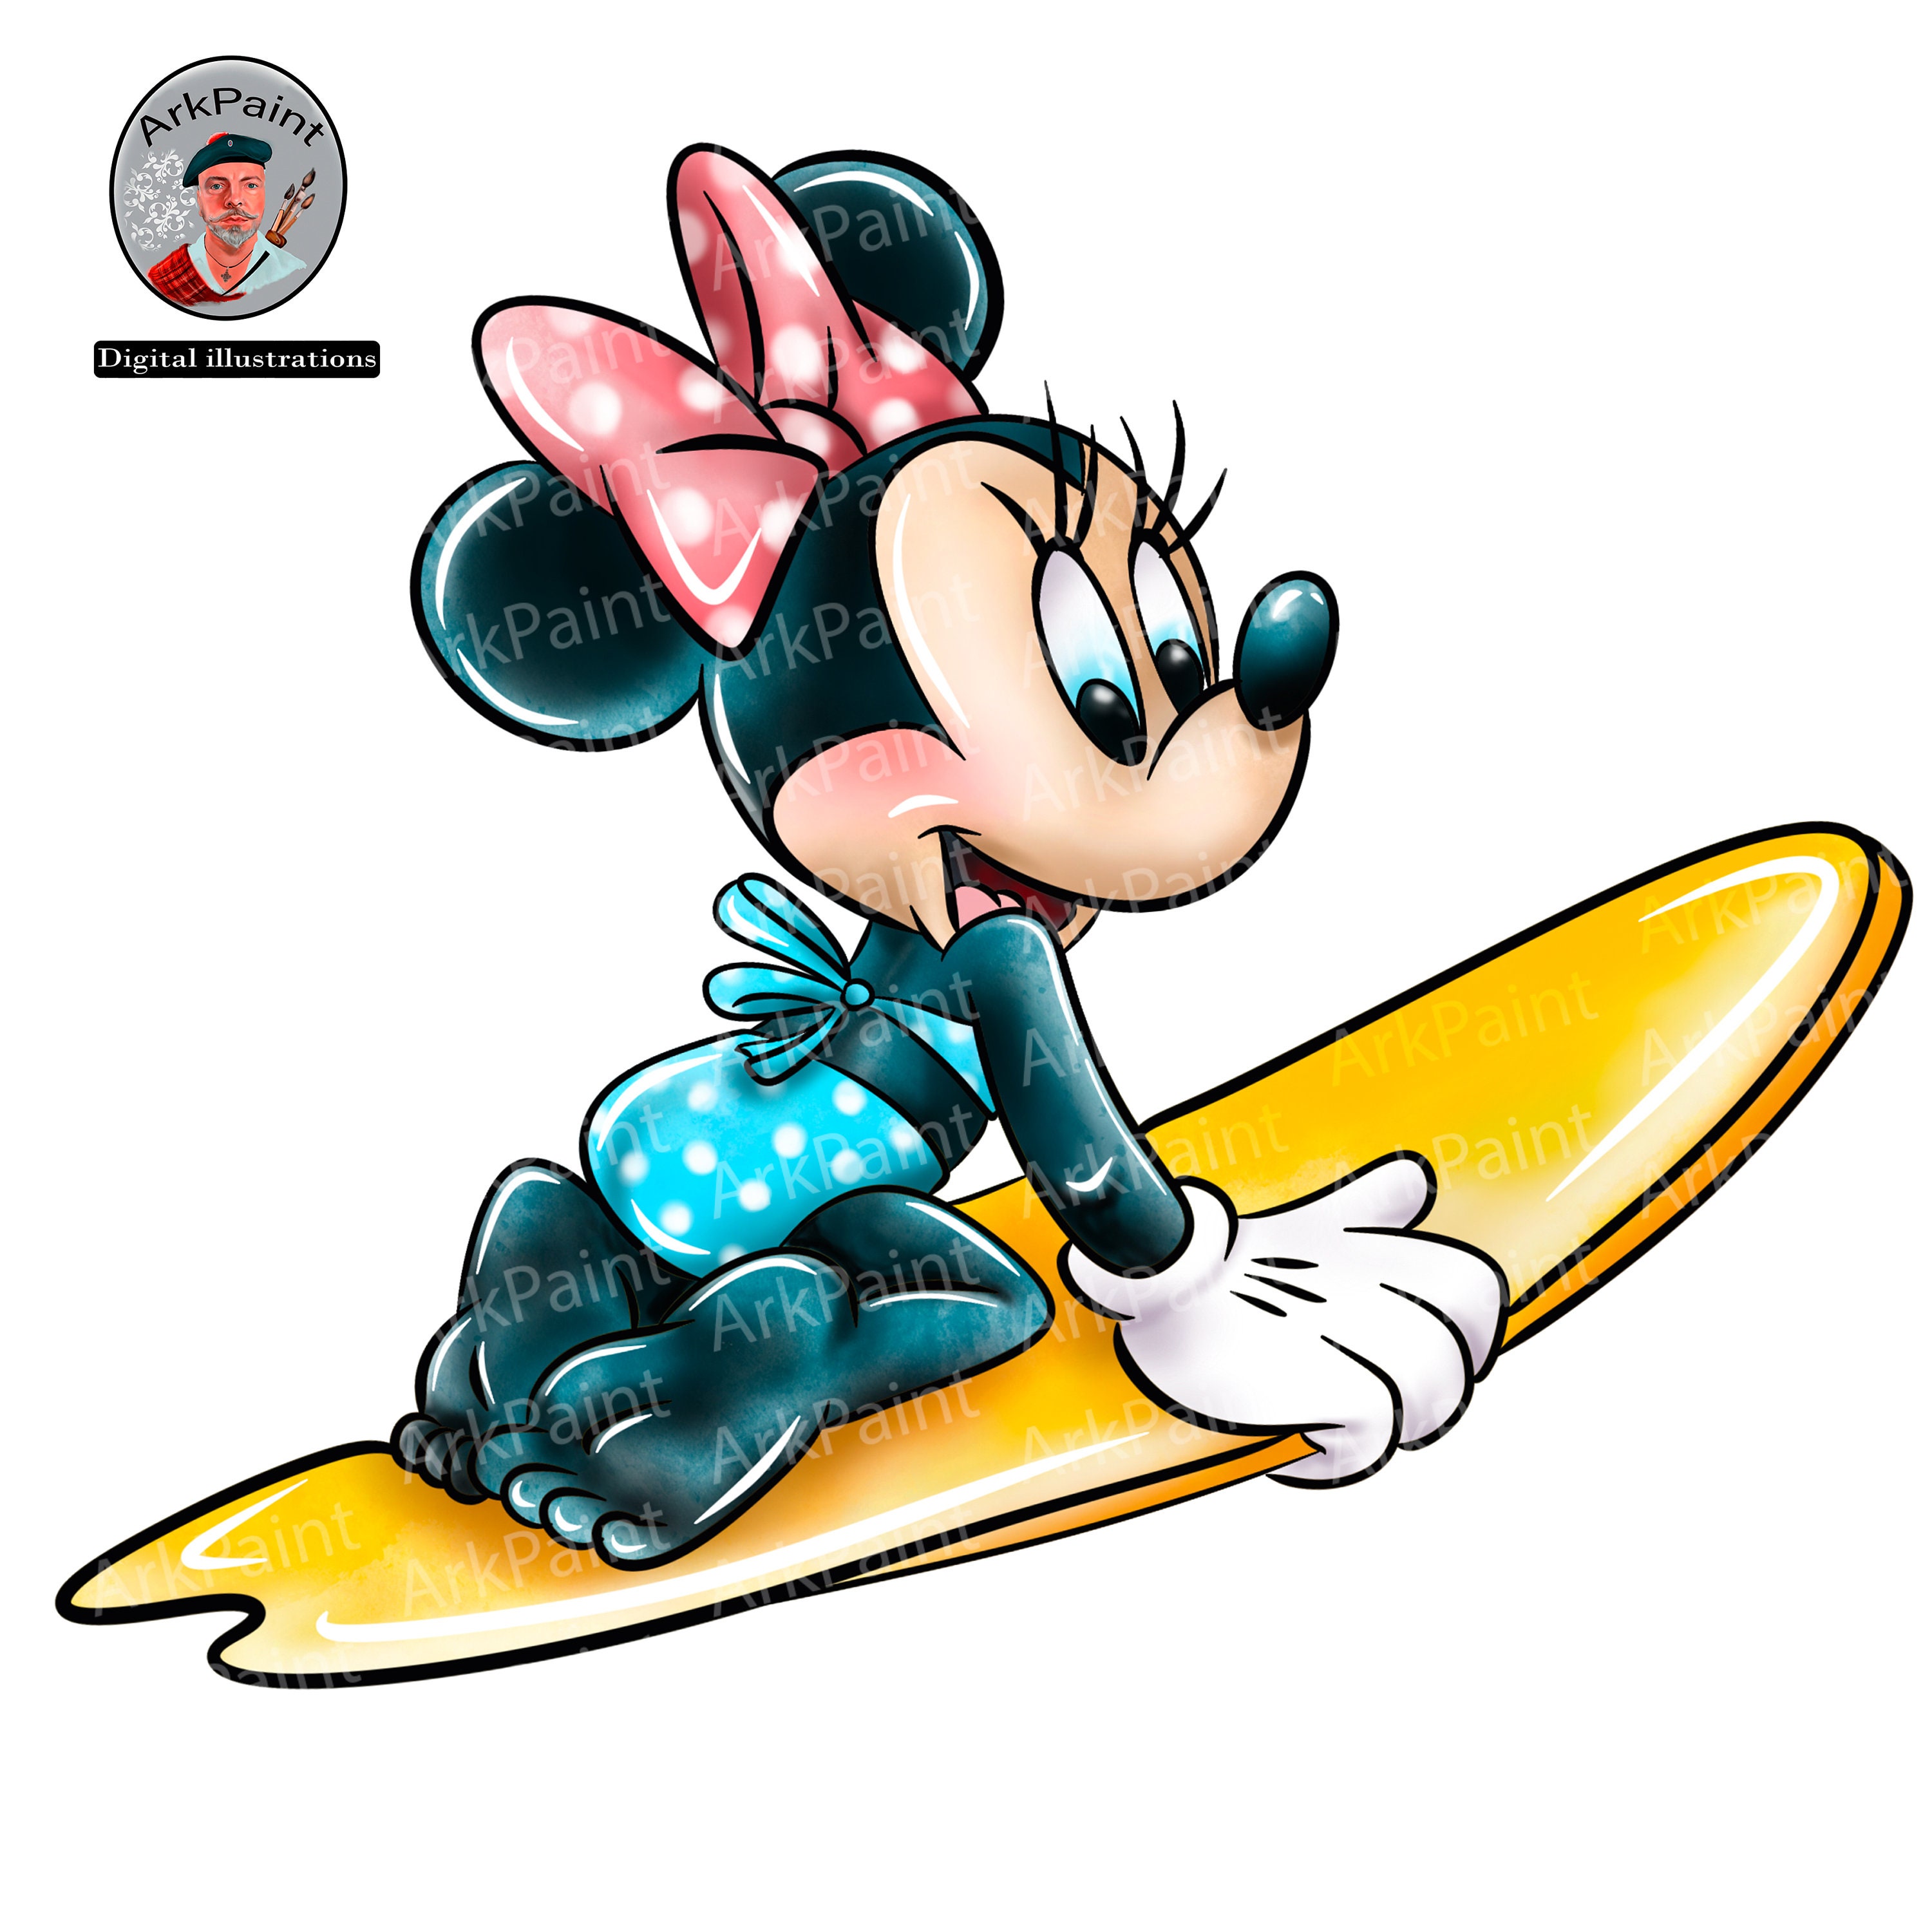 MLB Chicago White Sox Hawaiian Shirt Surfing Minnie Mouse Cool